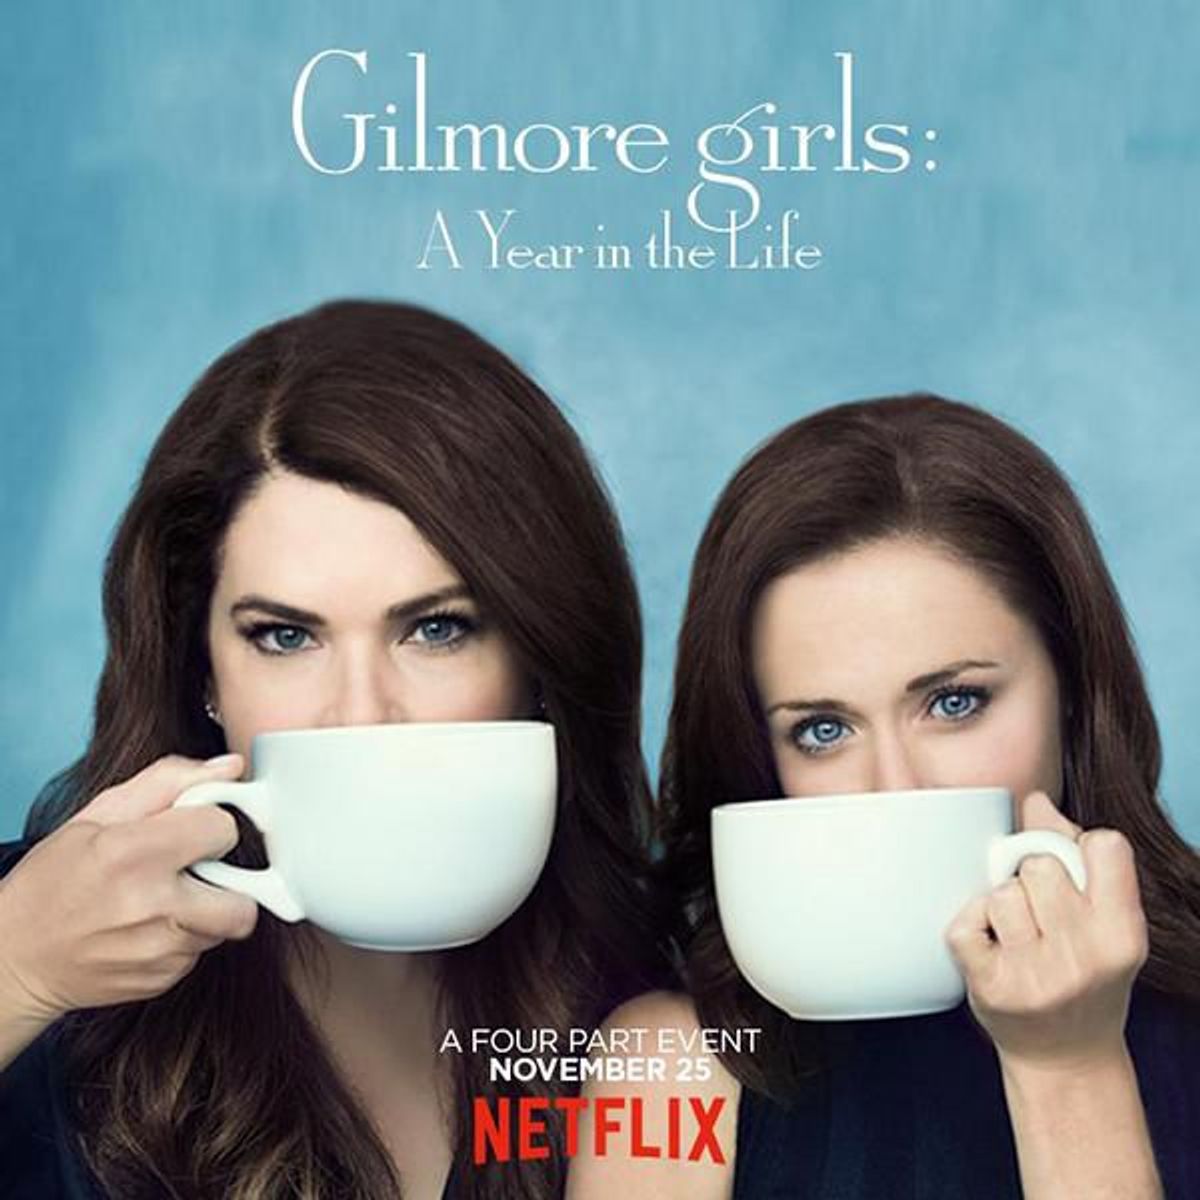 6 Images From The Gilmore Girls Revival That Are Sure To Get You Totally Stoked